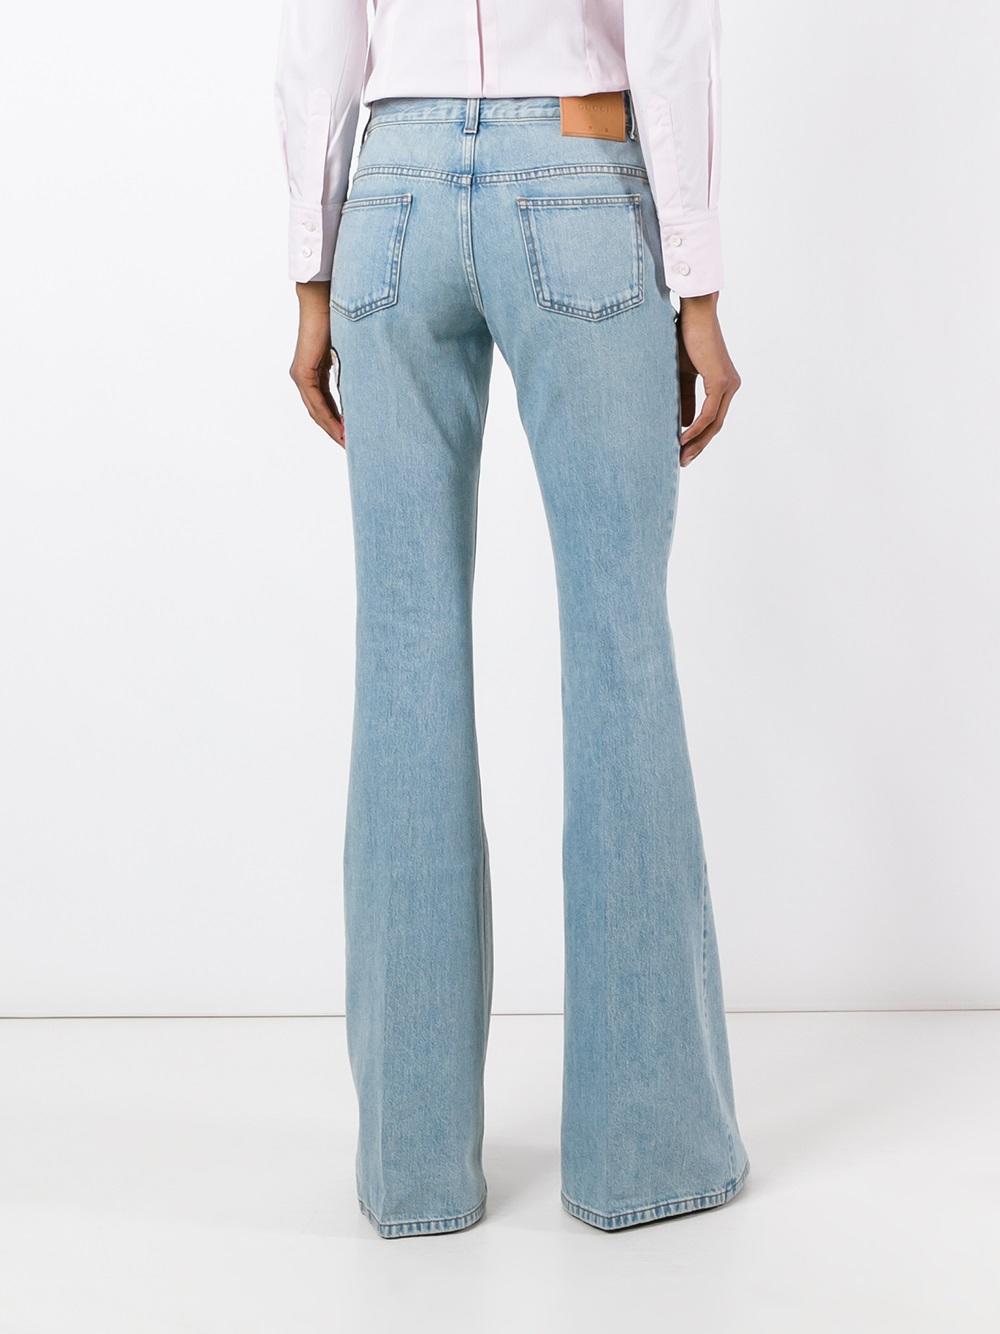 Lyst - Gucci Embroidered Flared Denim Jeans in Blue